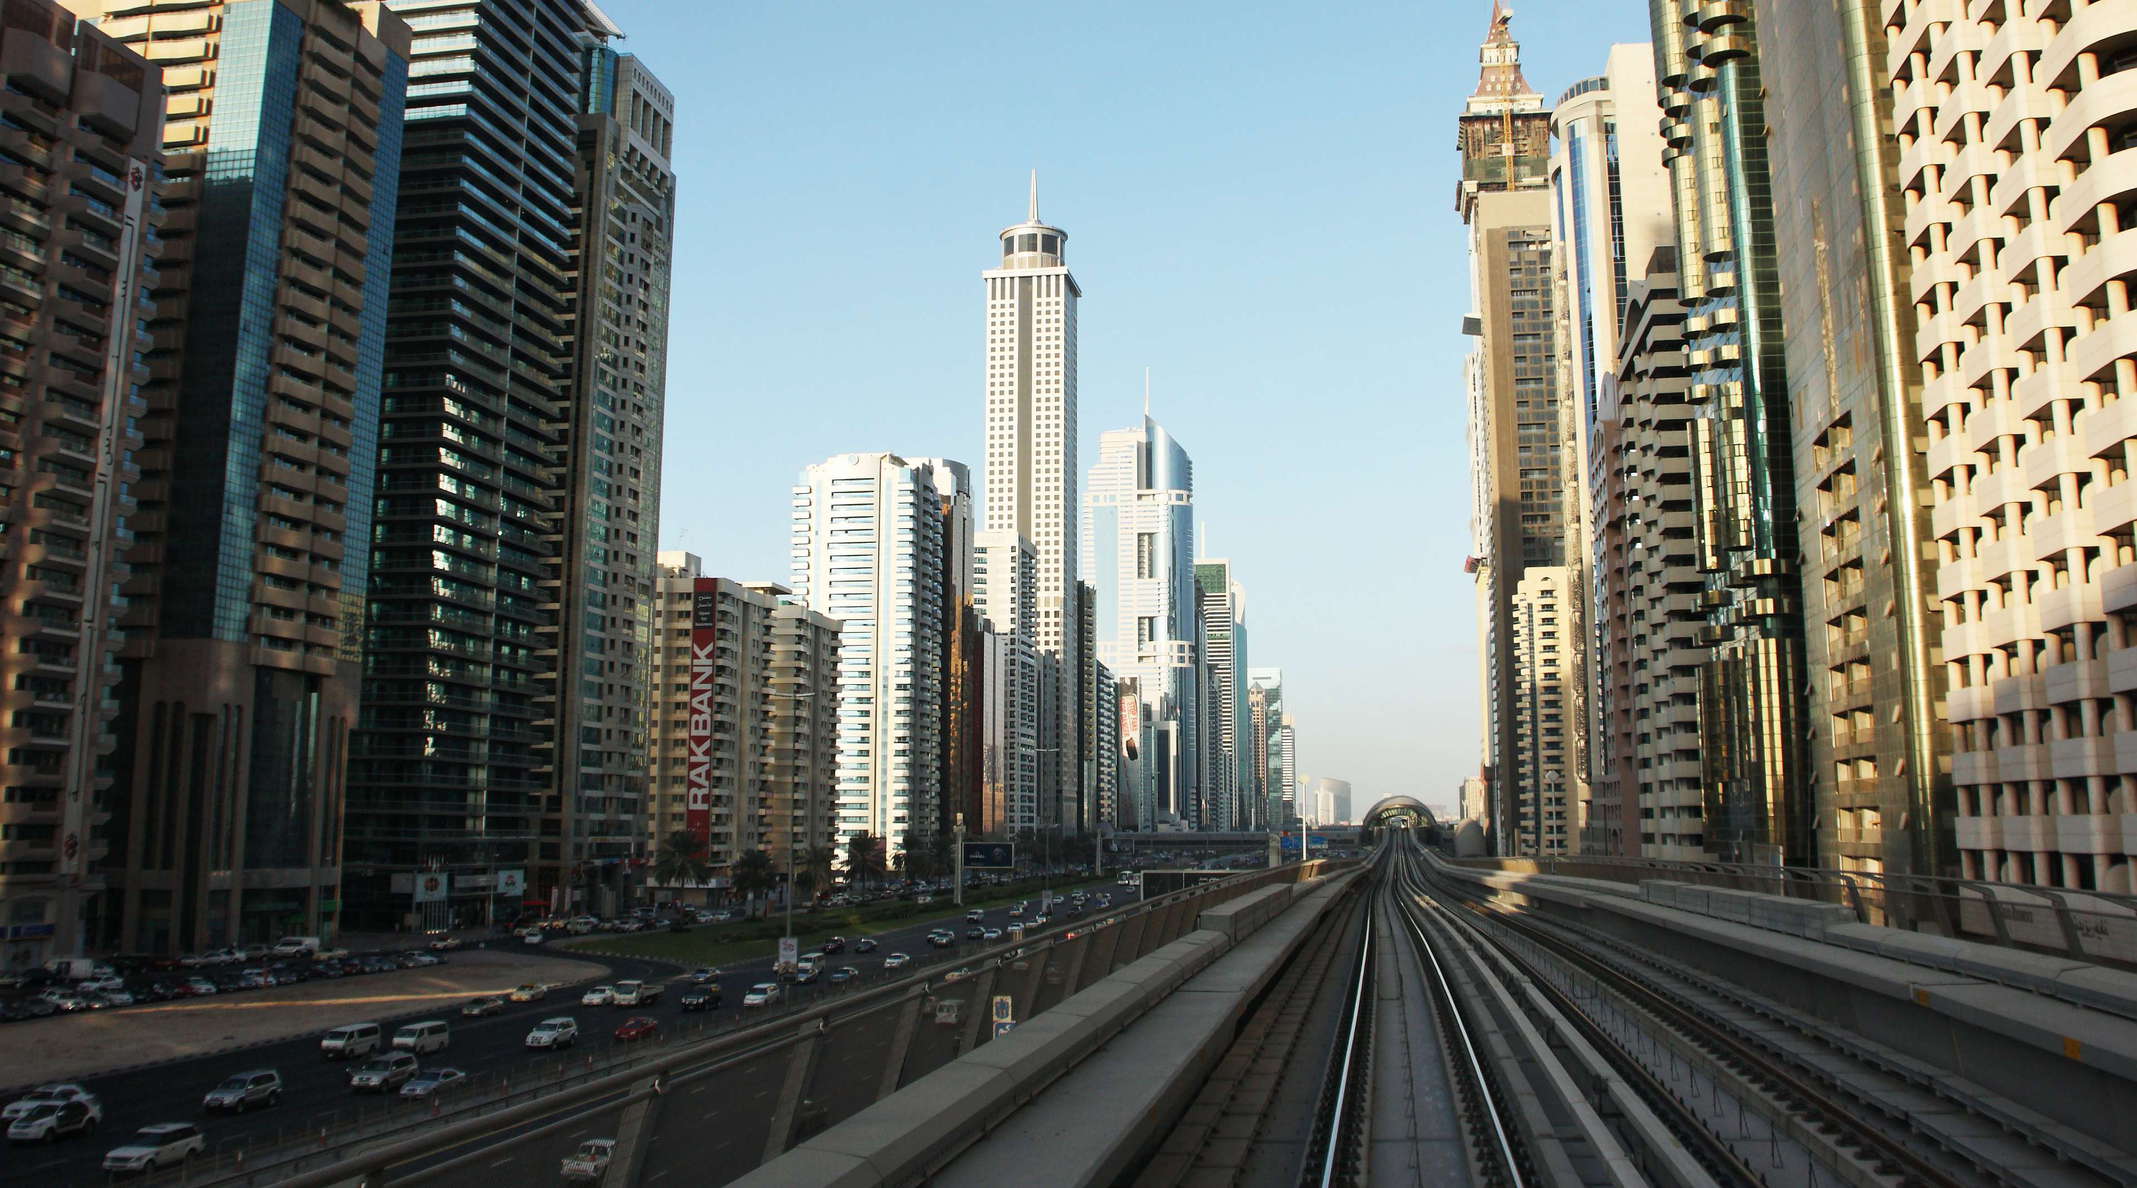 Dubai  |  Sheikh Zayed Road with metro and skyscrapers